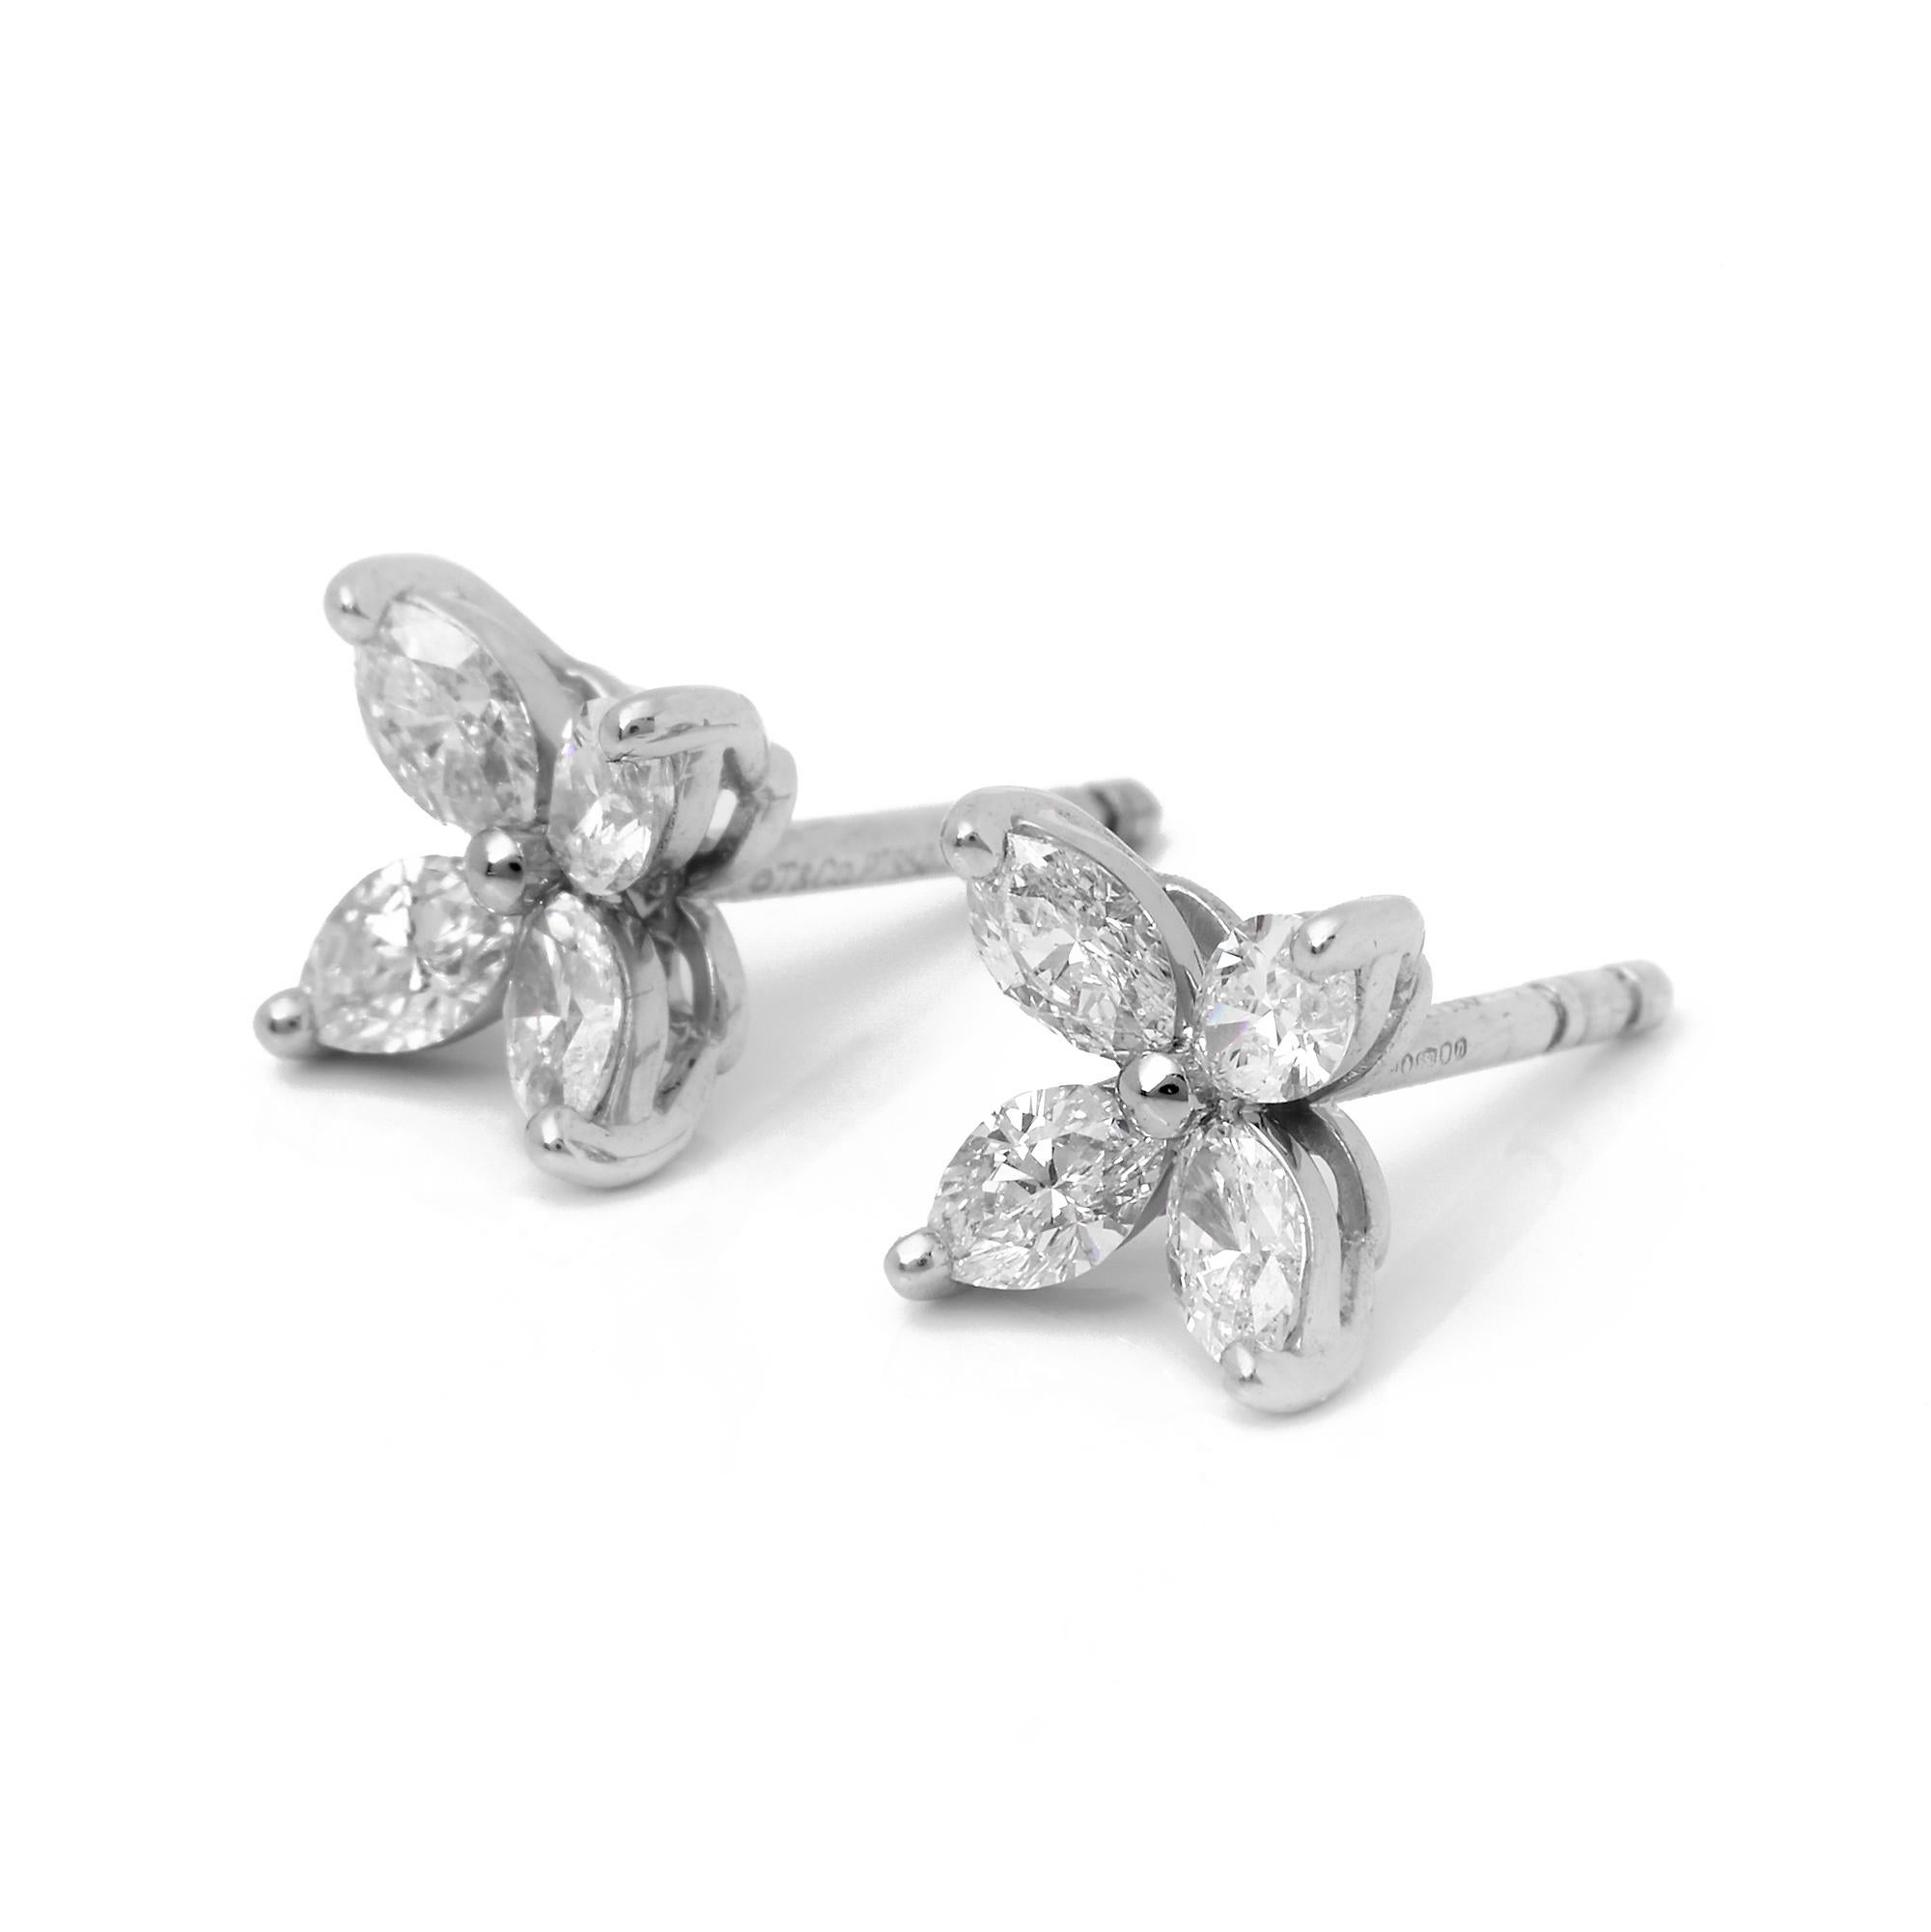 These earrings by Tiffany & Co are from their Victoria collection featuring 8 marquise cut diamonds totalling 0.64ct, made in platinum. Accompanied with a Tiffany box. Our Xupes reference is J570 should you need to quote this. 